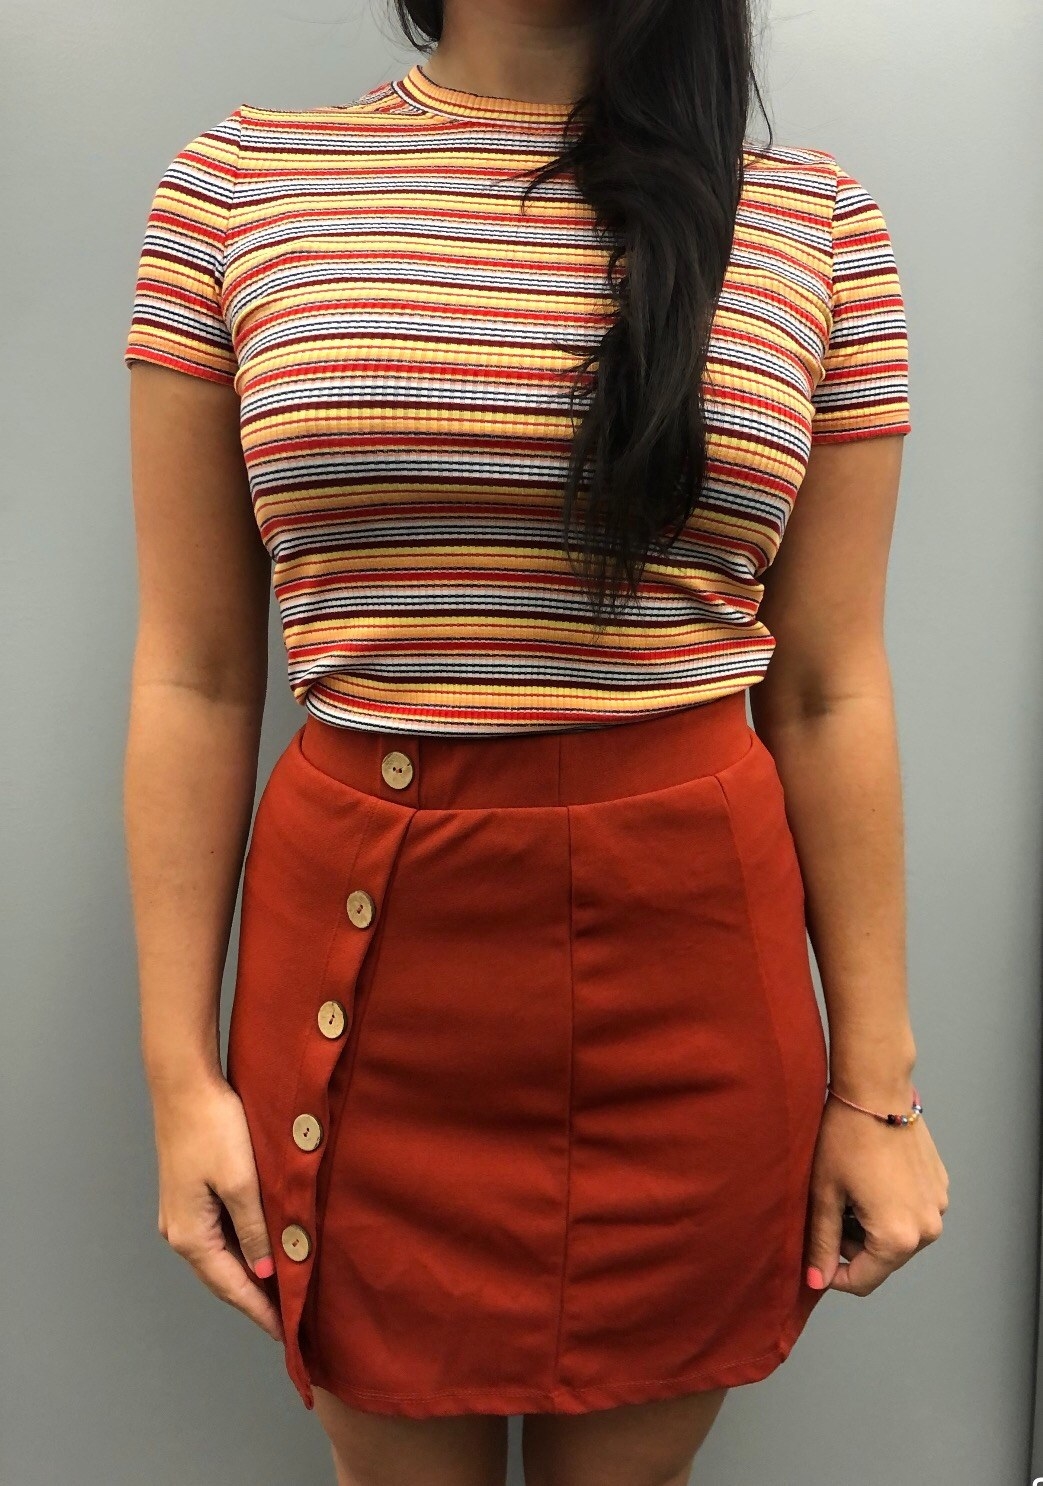 The shirt worn by an Amazon reviewer and paired with a skirt